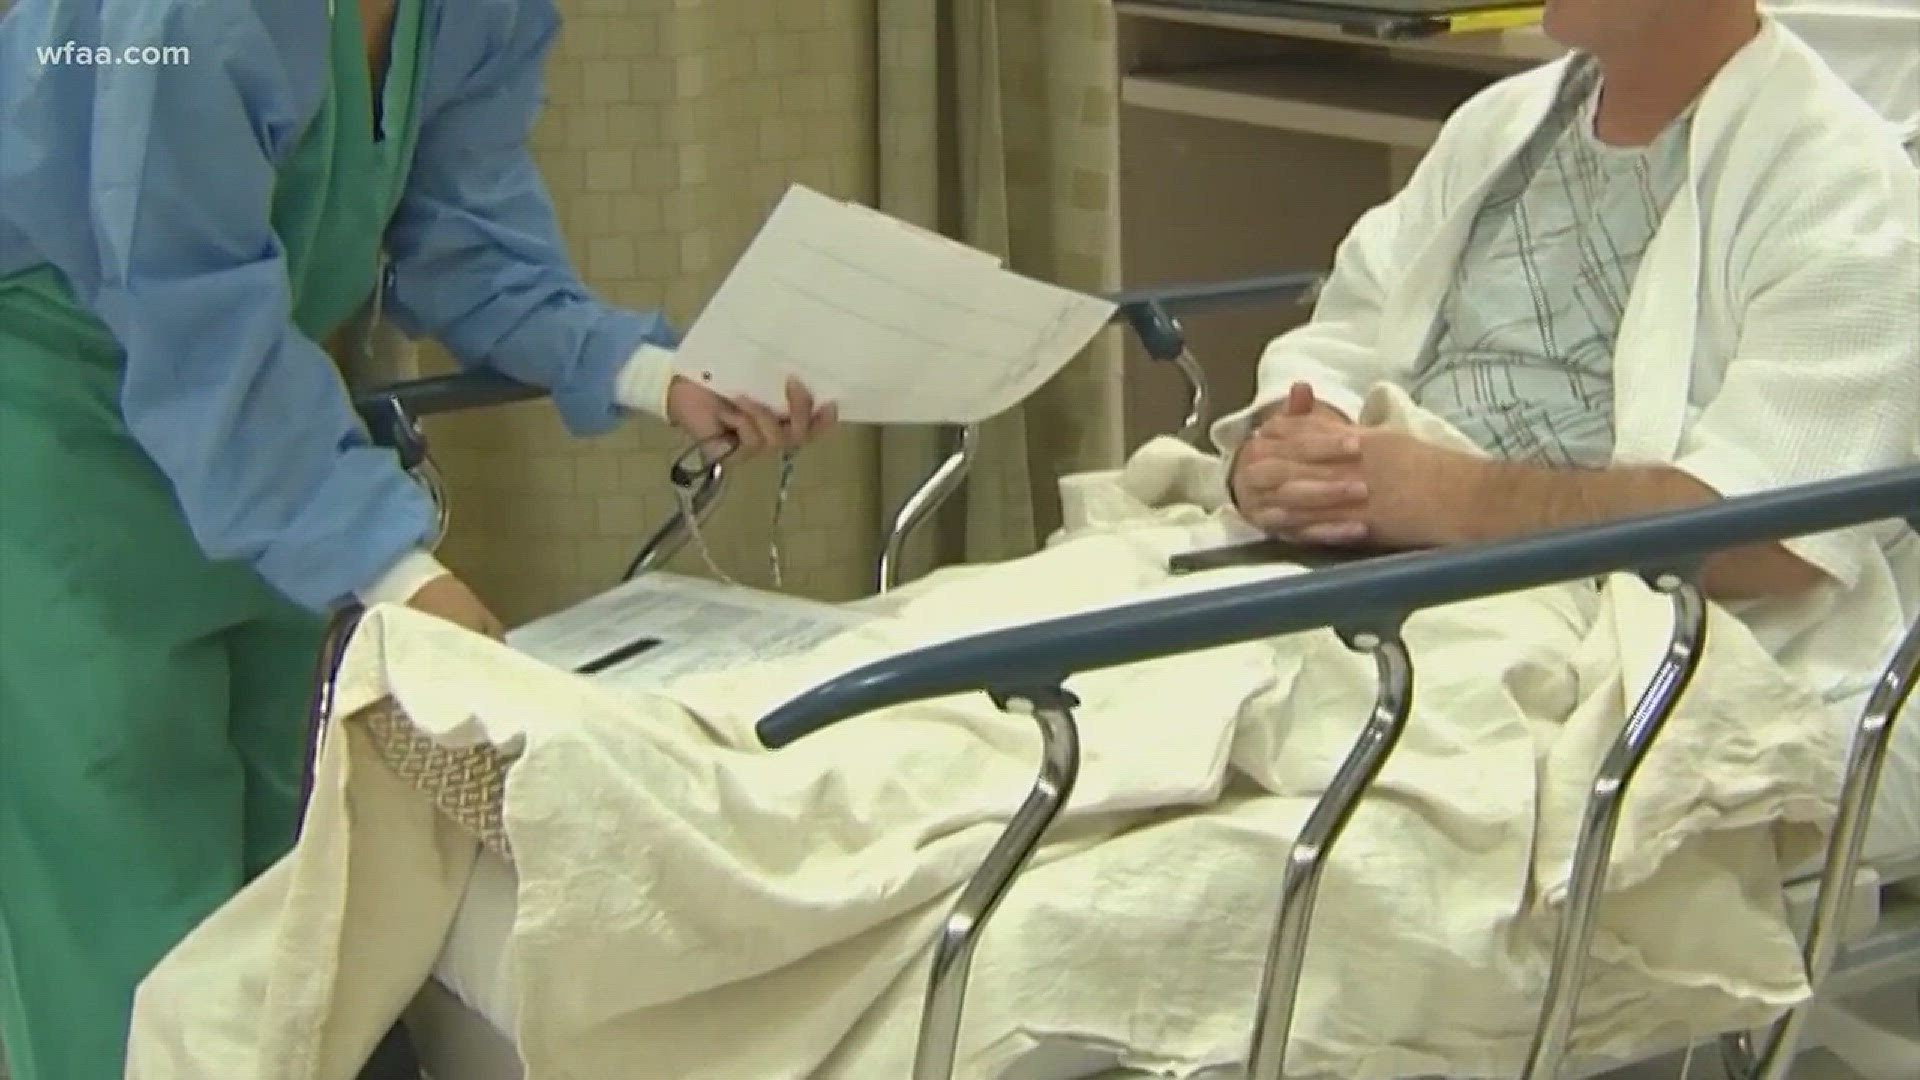 North Texas hospitals acknowledge a shortage in powerful pain medications